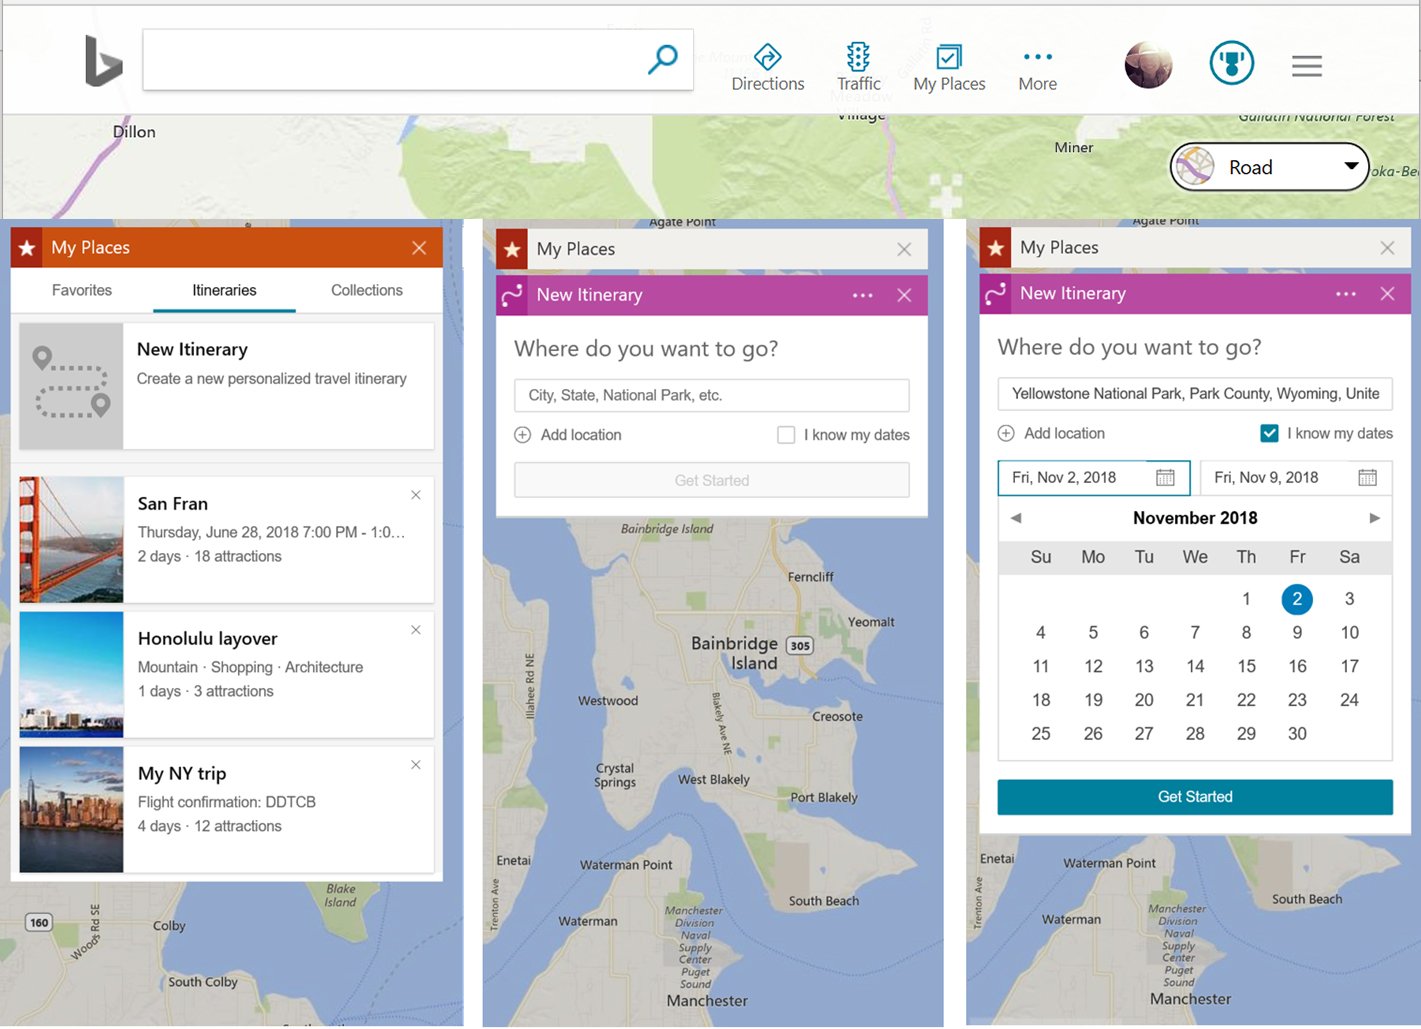 Microsoft now allows you to create a new travel itinerary on Bing